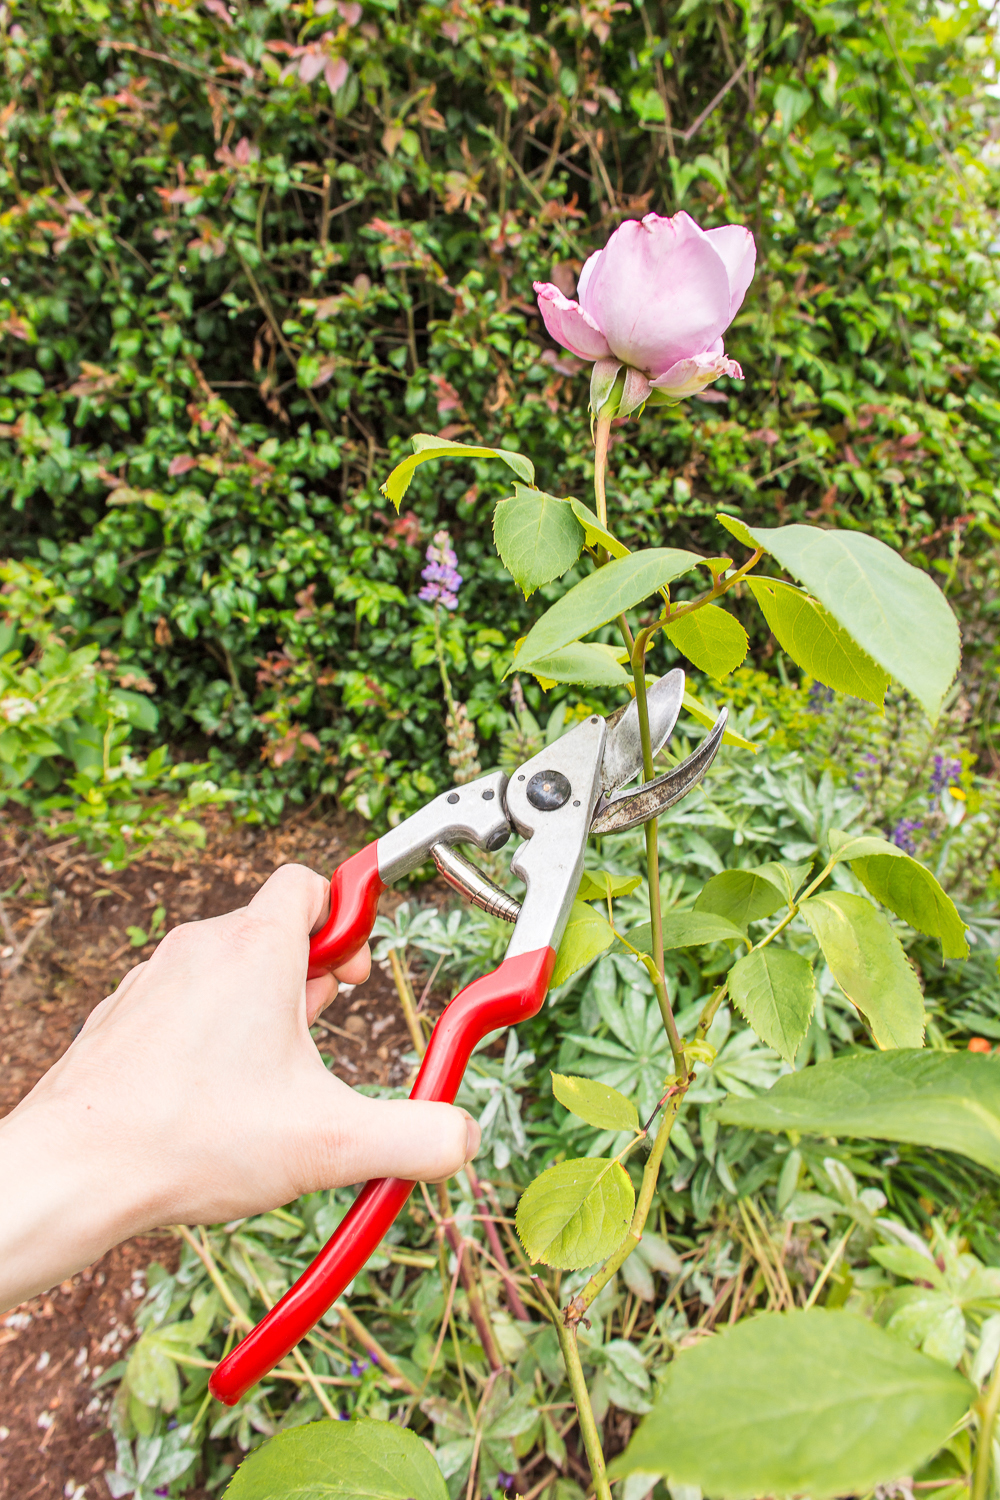 How to clean and sharpen garden tools